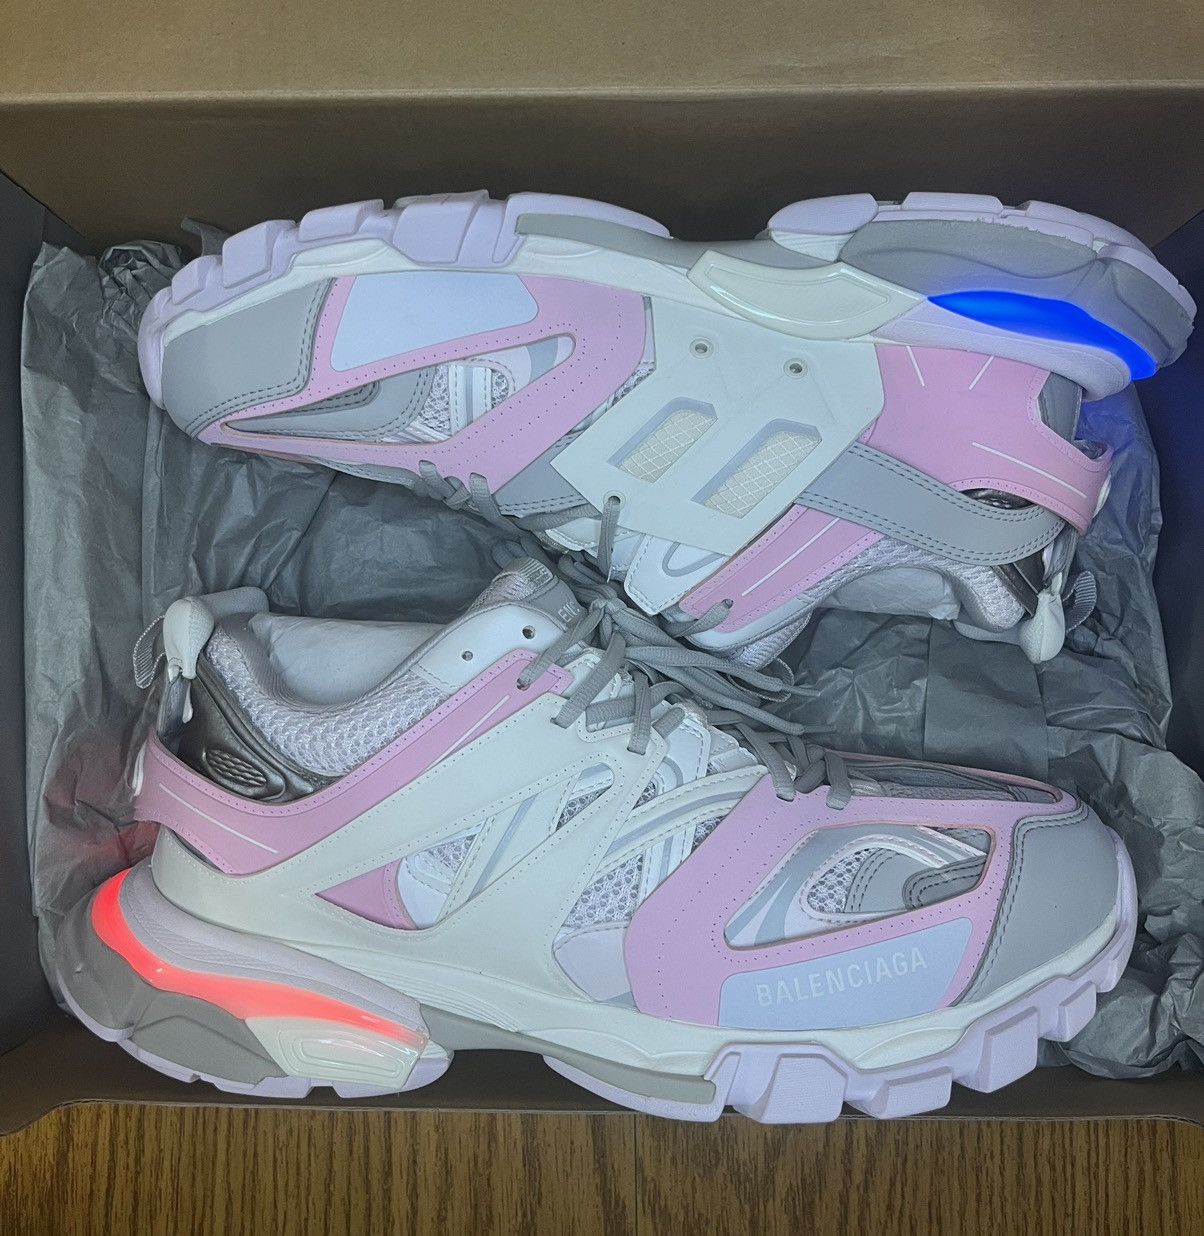 Pre-owned Balenciaga Track Led Sneaker (pink